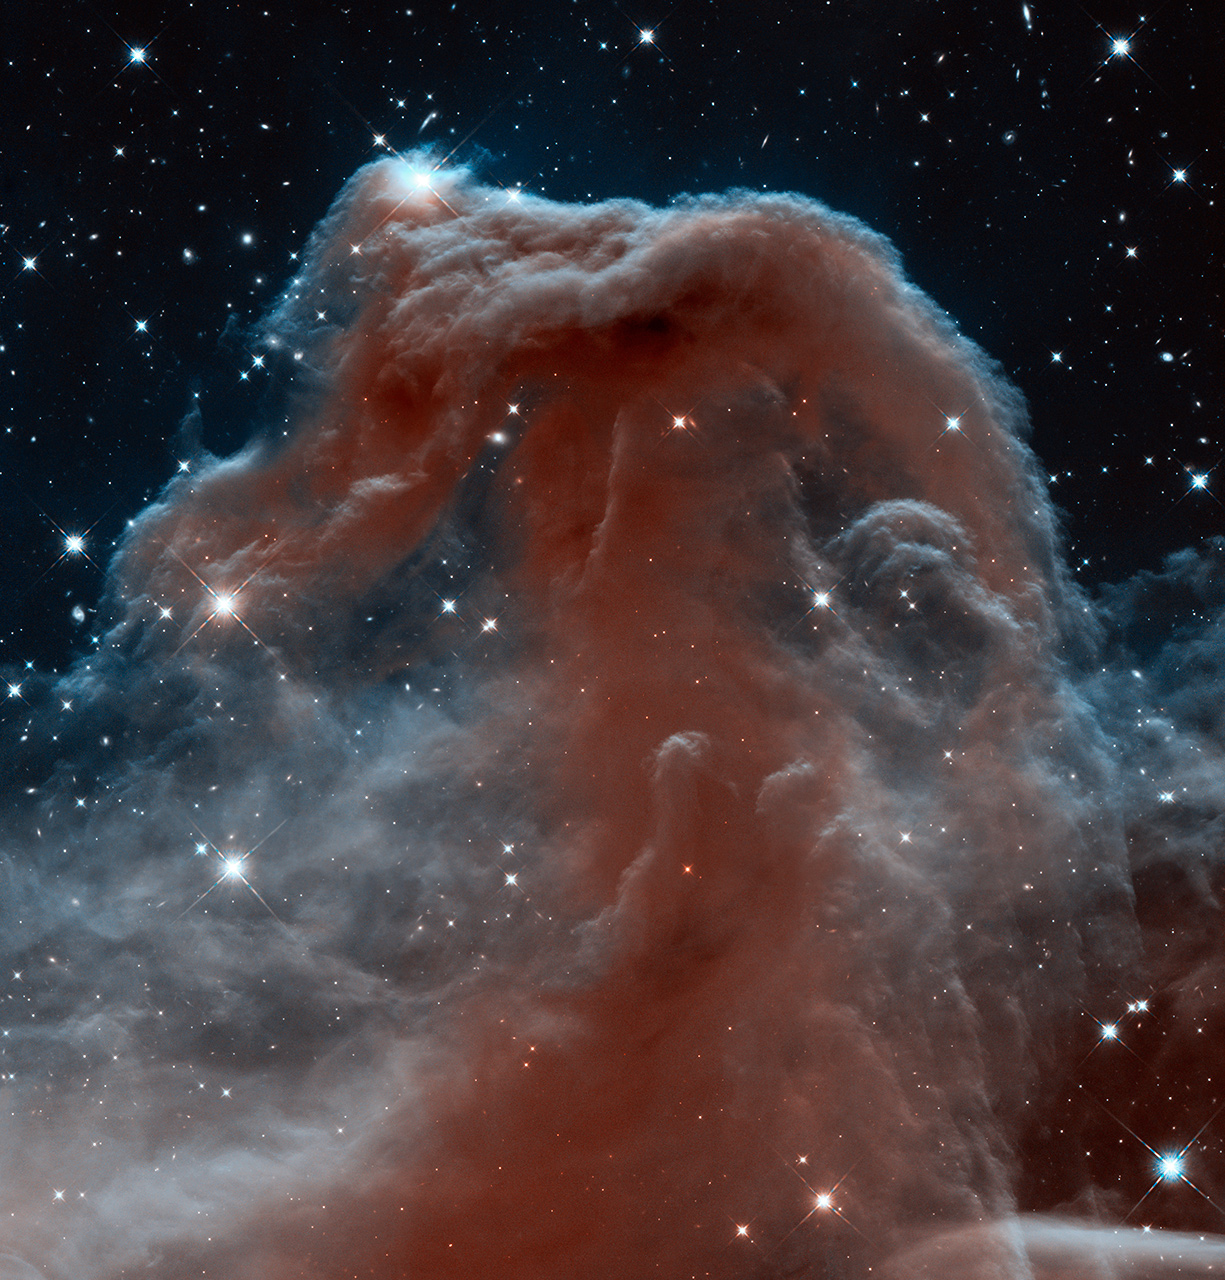 The Horsehead Nebula in Infrared from Hubble